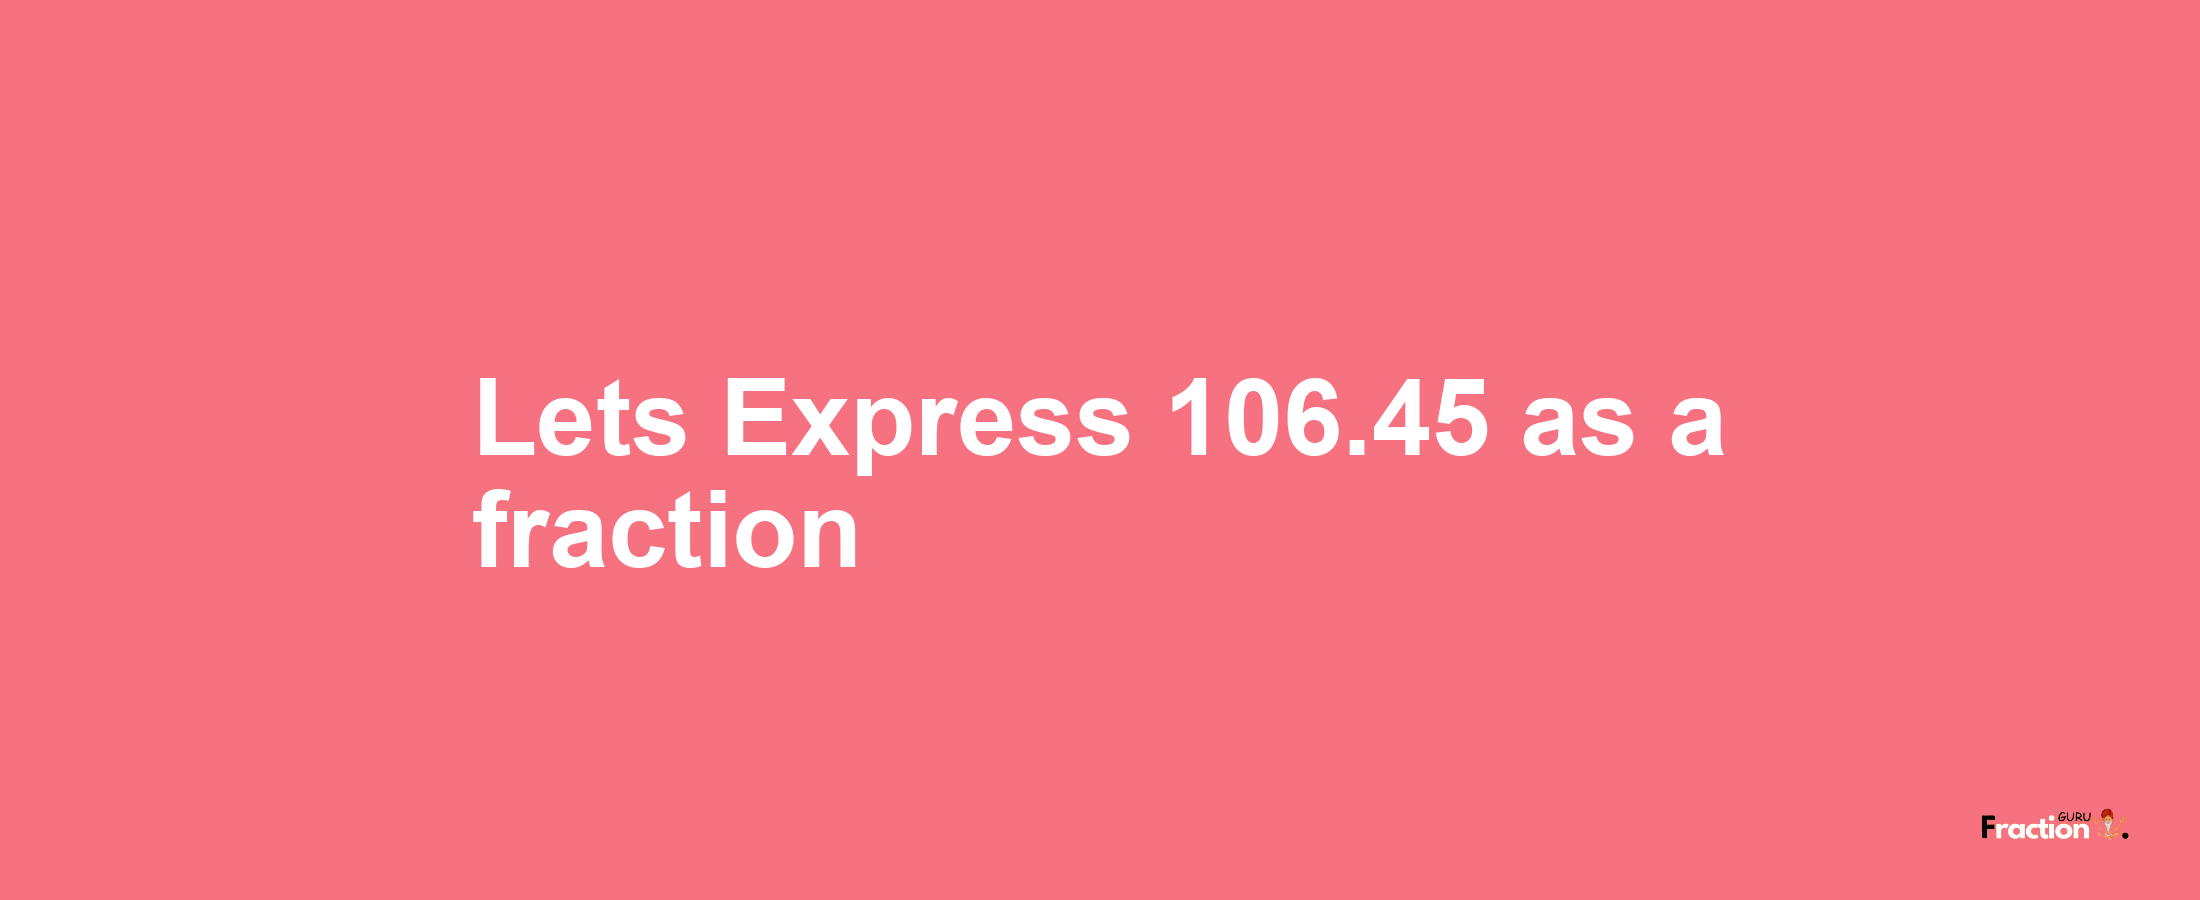 Lets Express 106.45 as afraction